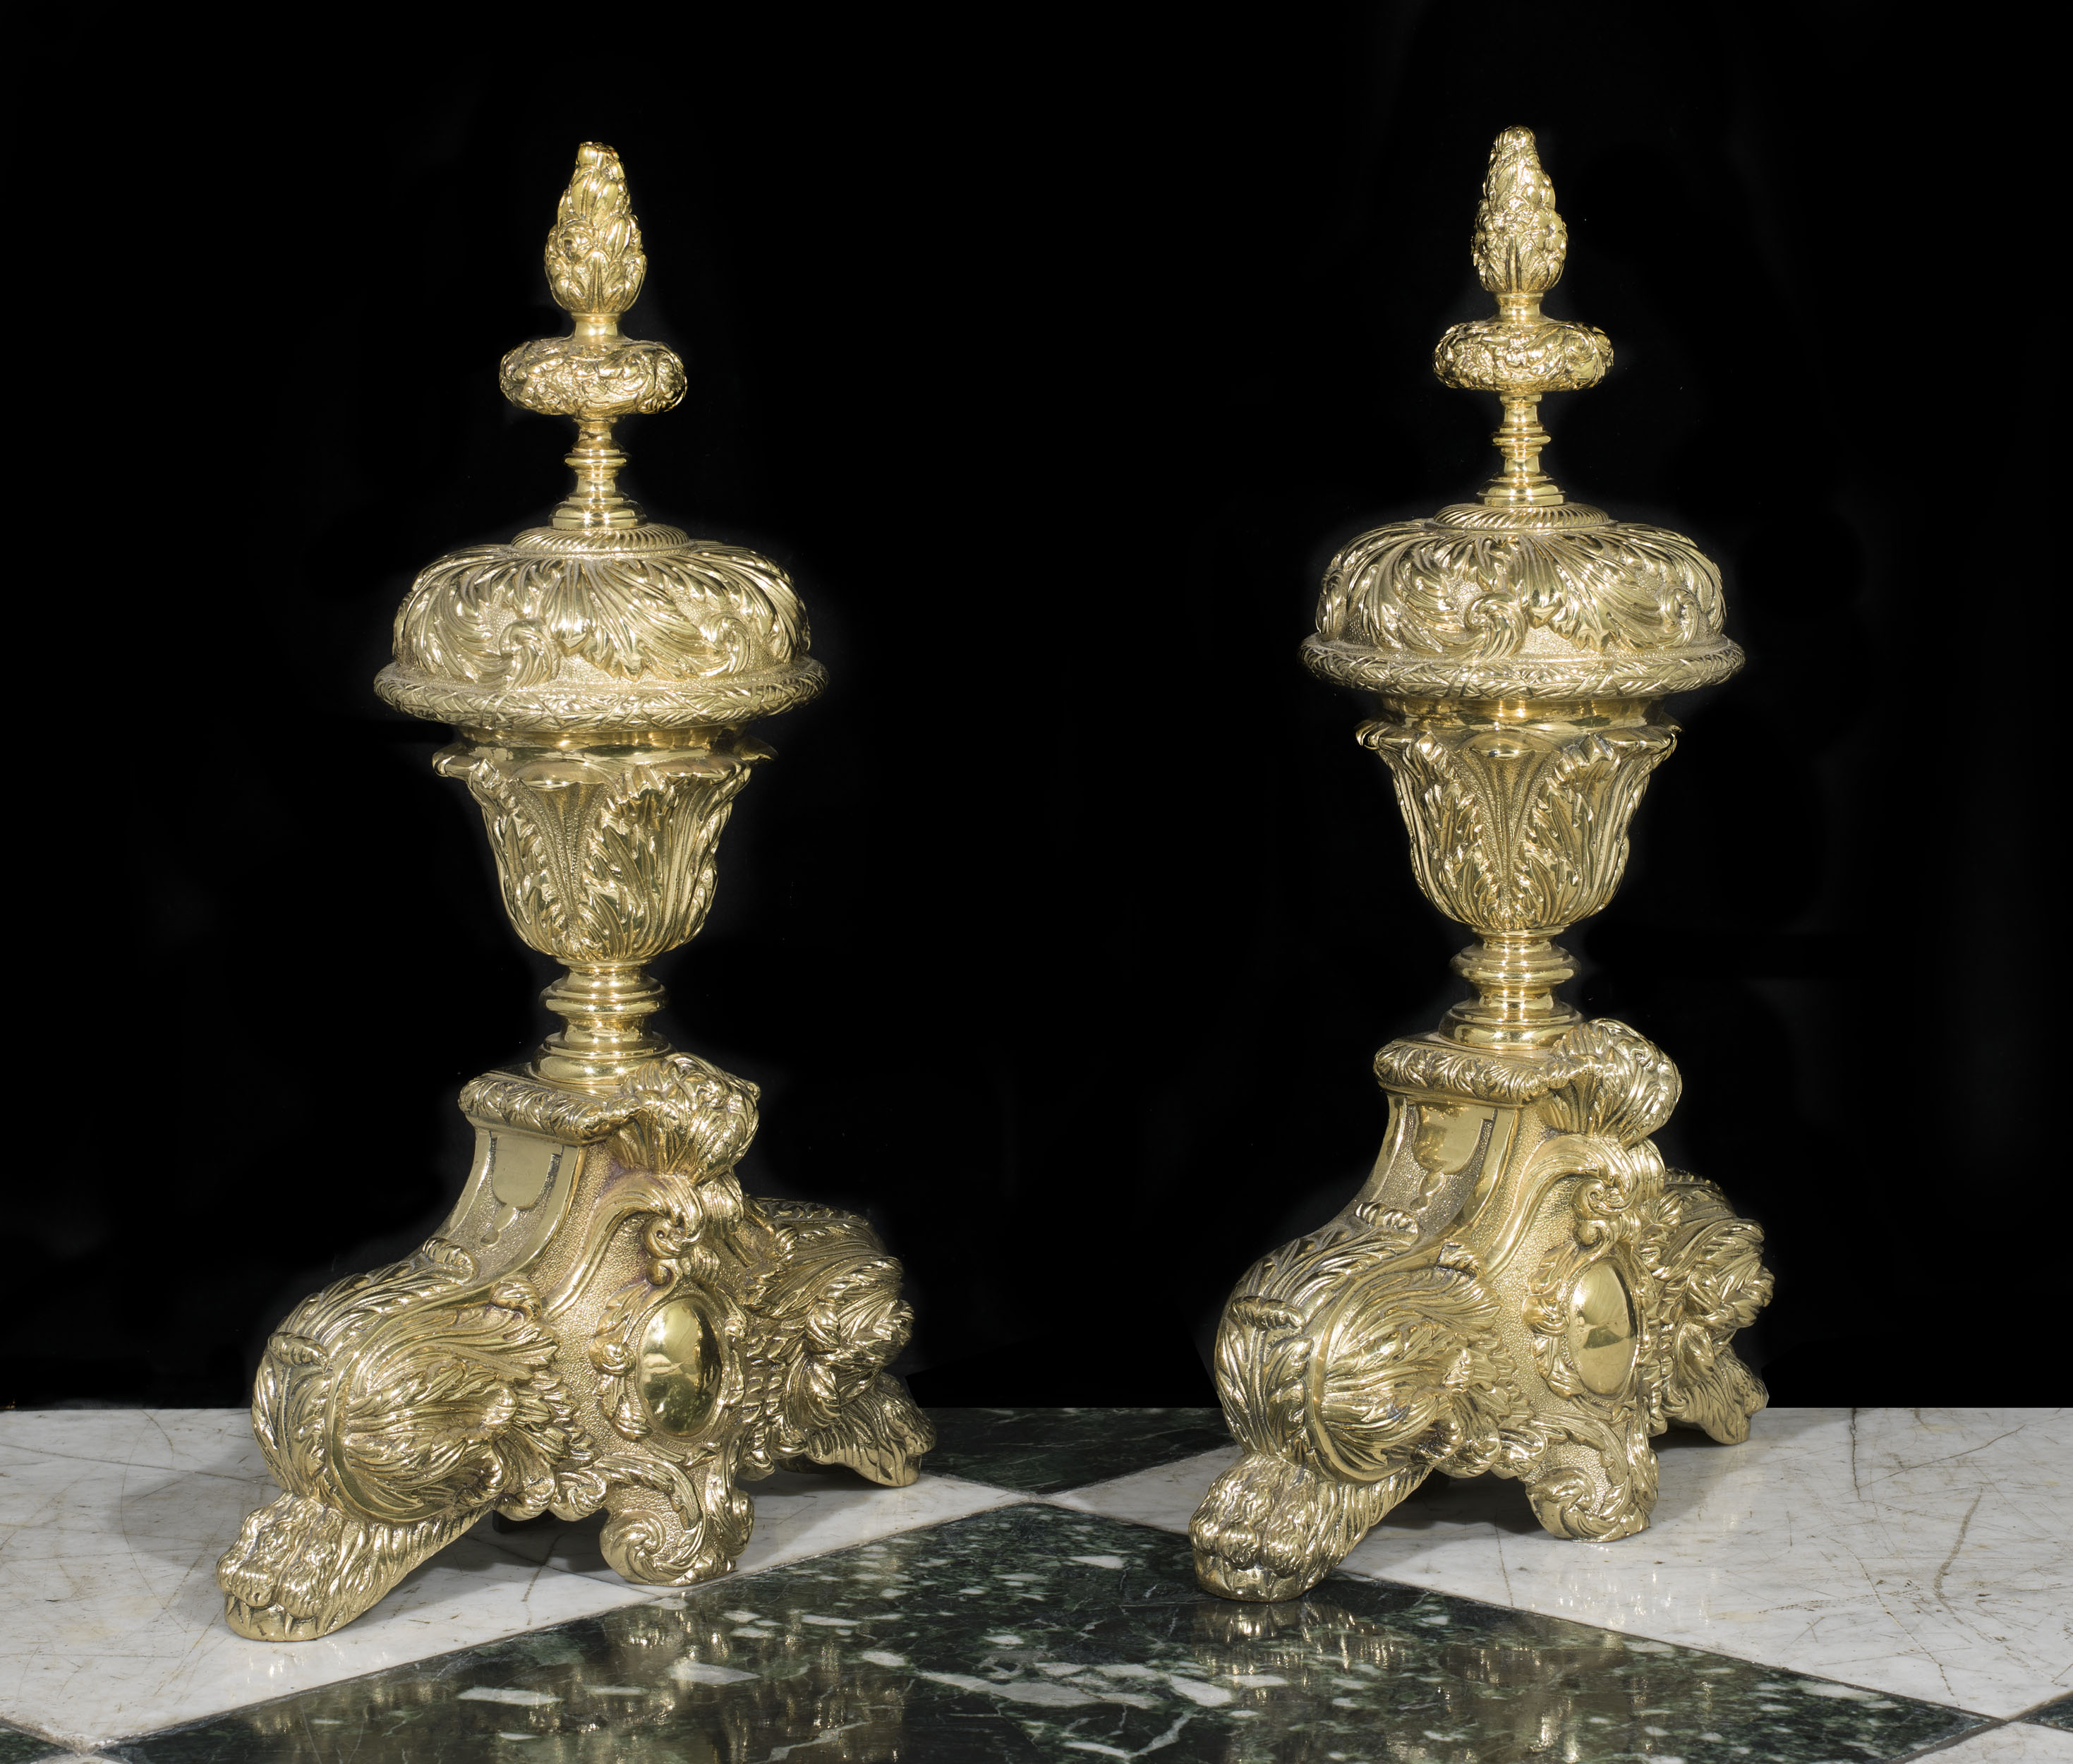  Early 20th century pair of brass Baroque style chenet